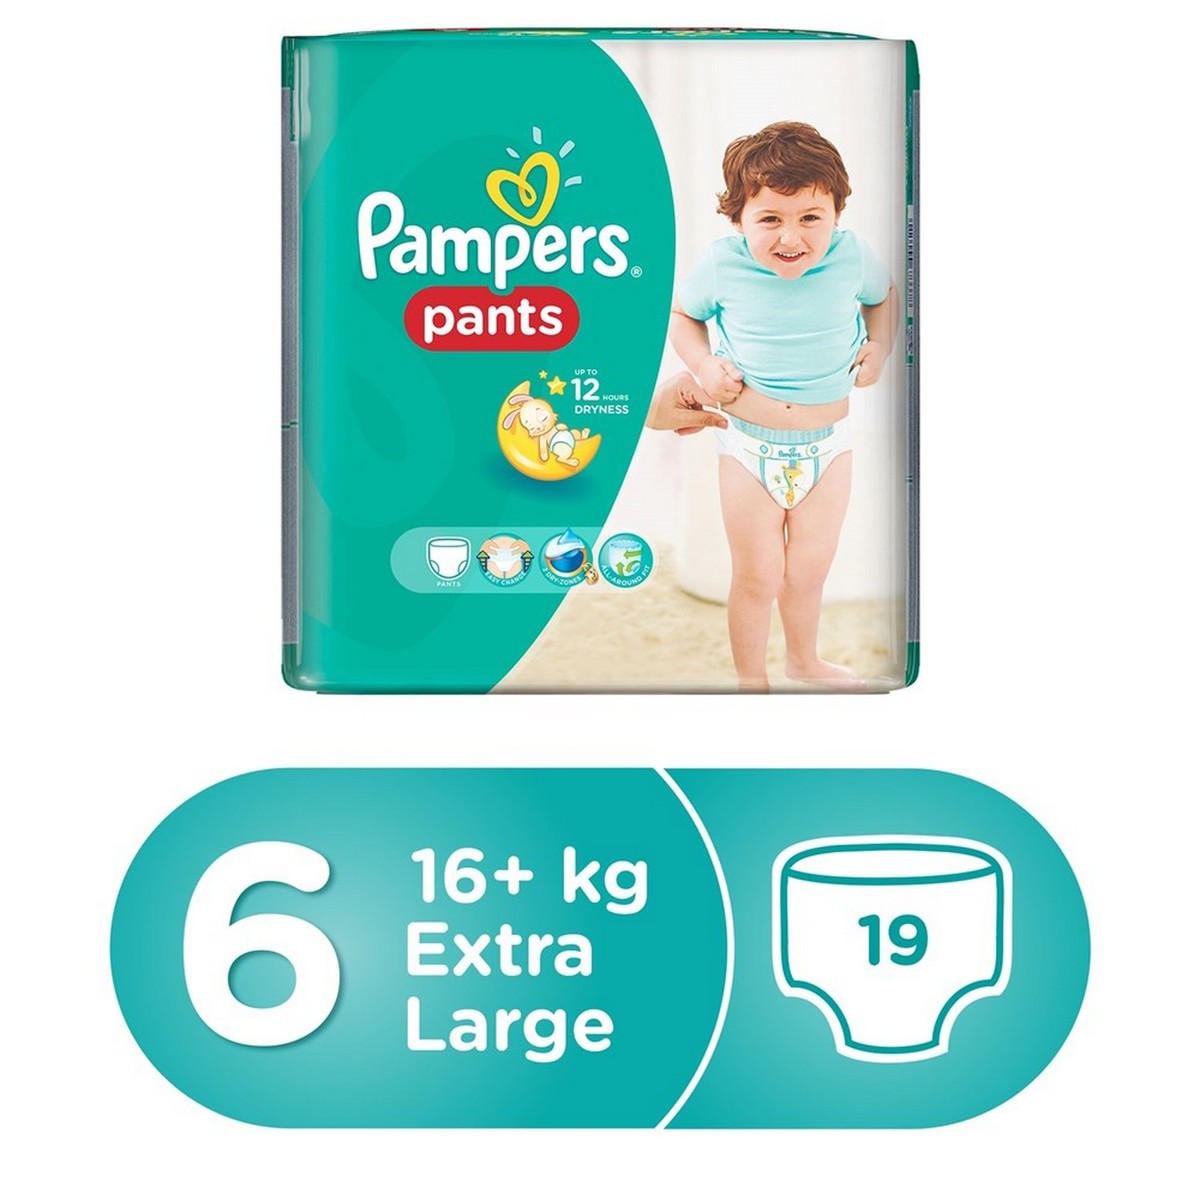 Pampers Pants Diapers, Size 6, Extra Large, 16+ kg, Carry Pack, 19pcs Count